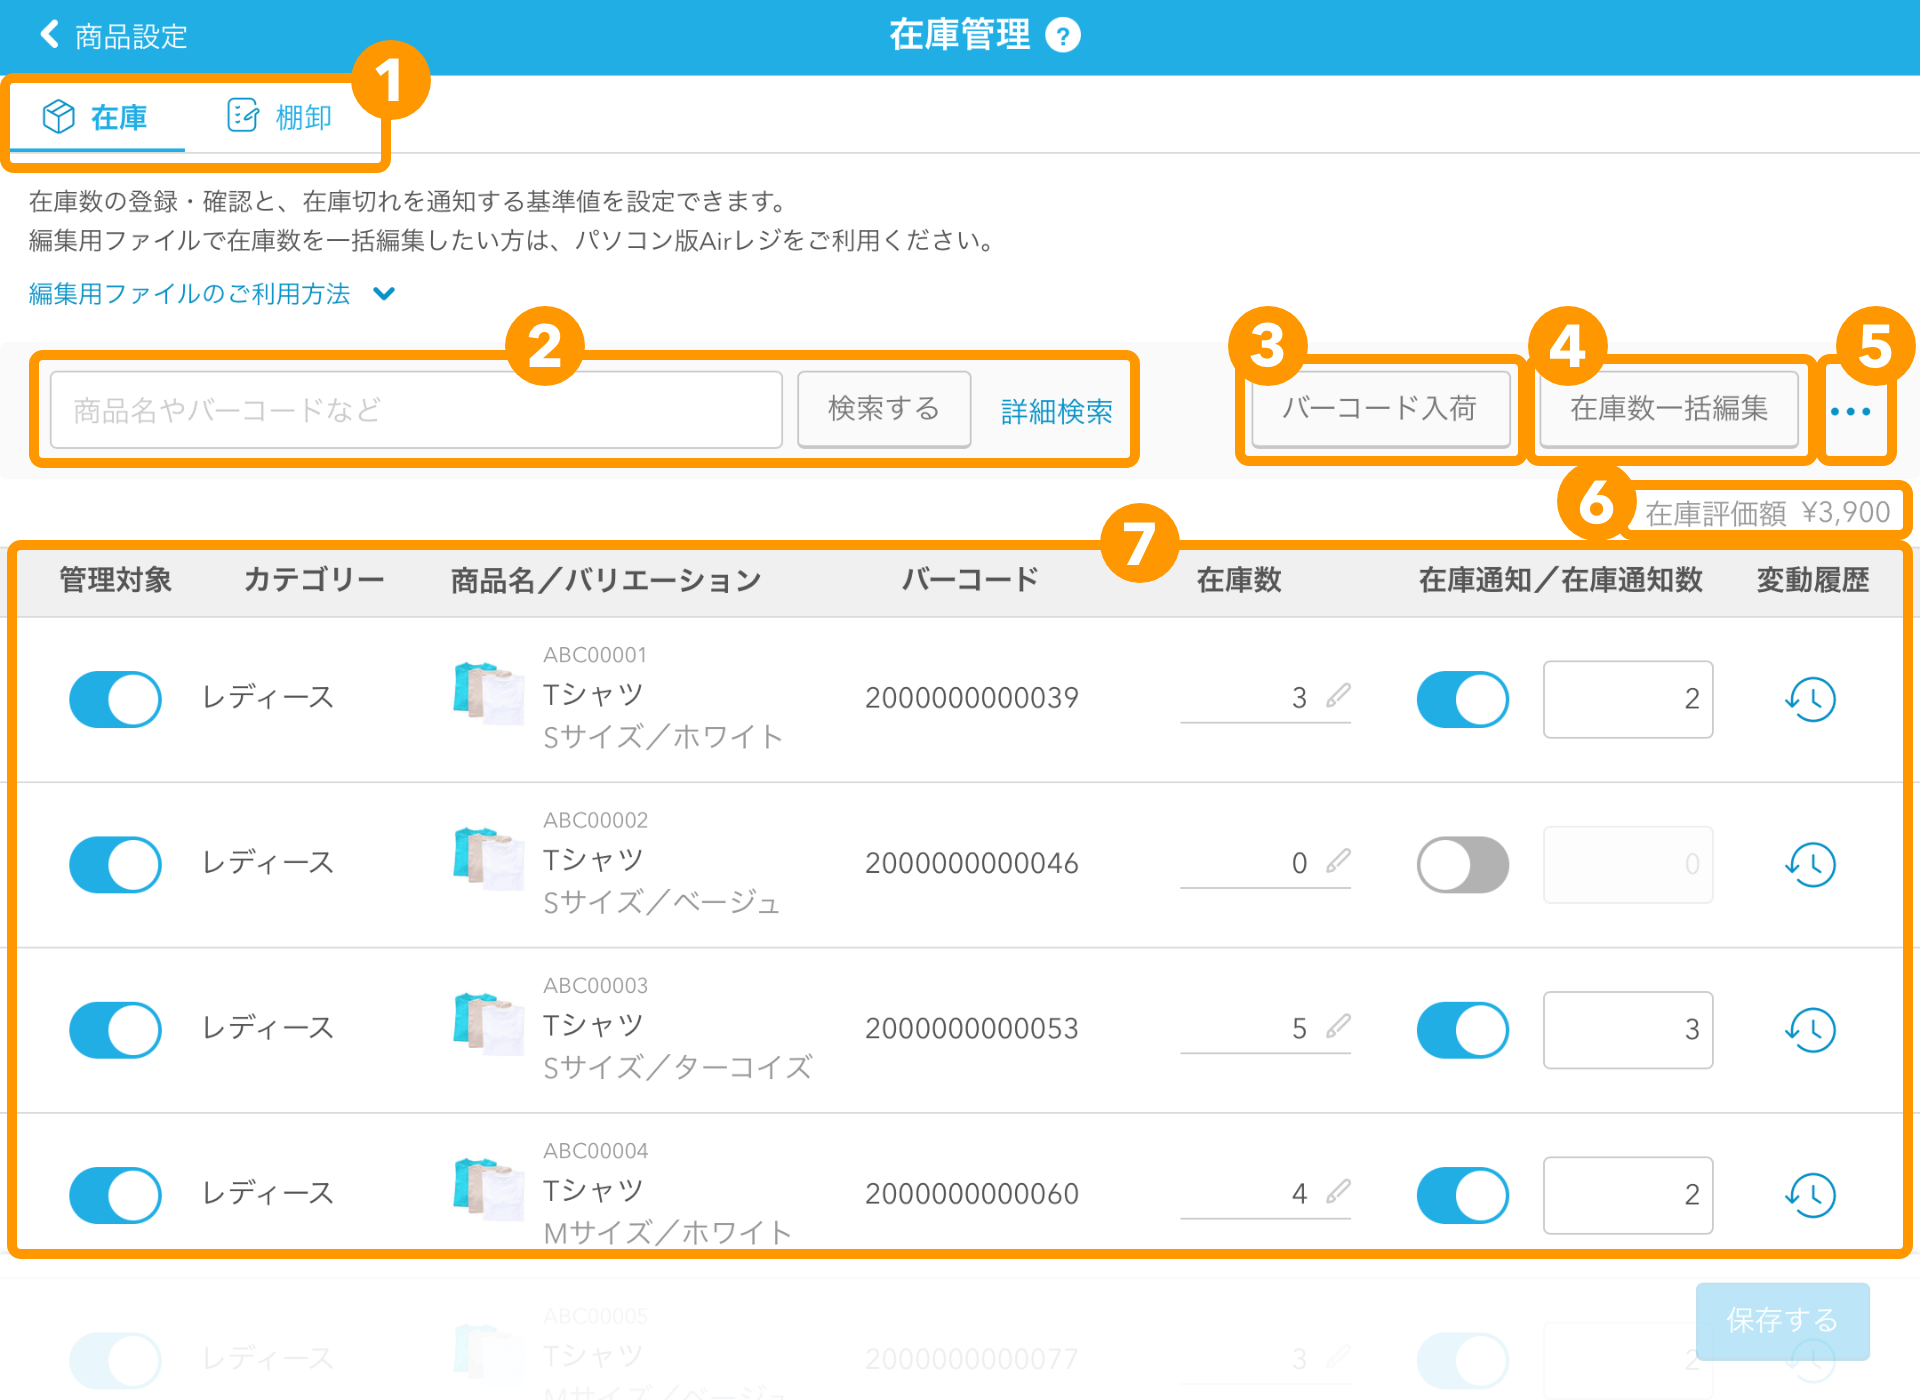 01 Airレジ アプリ 在庫管理画面